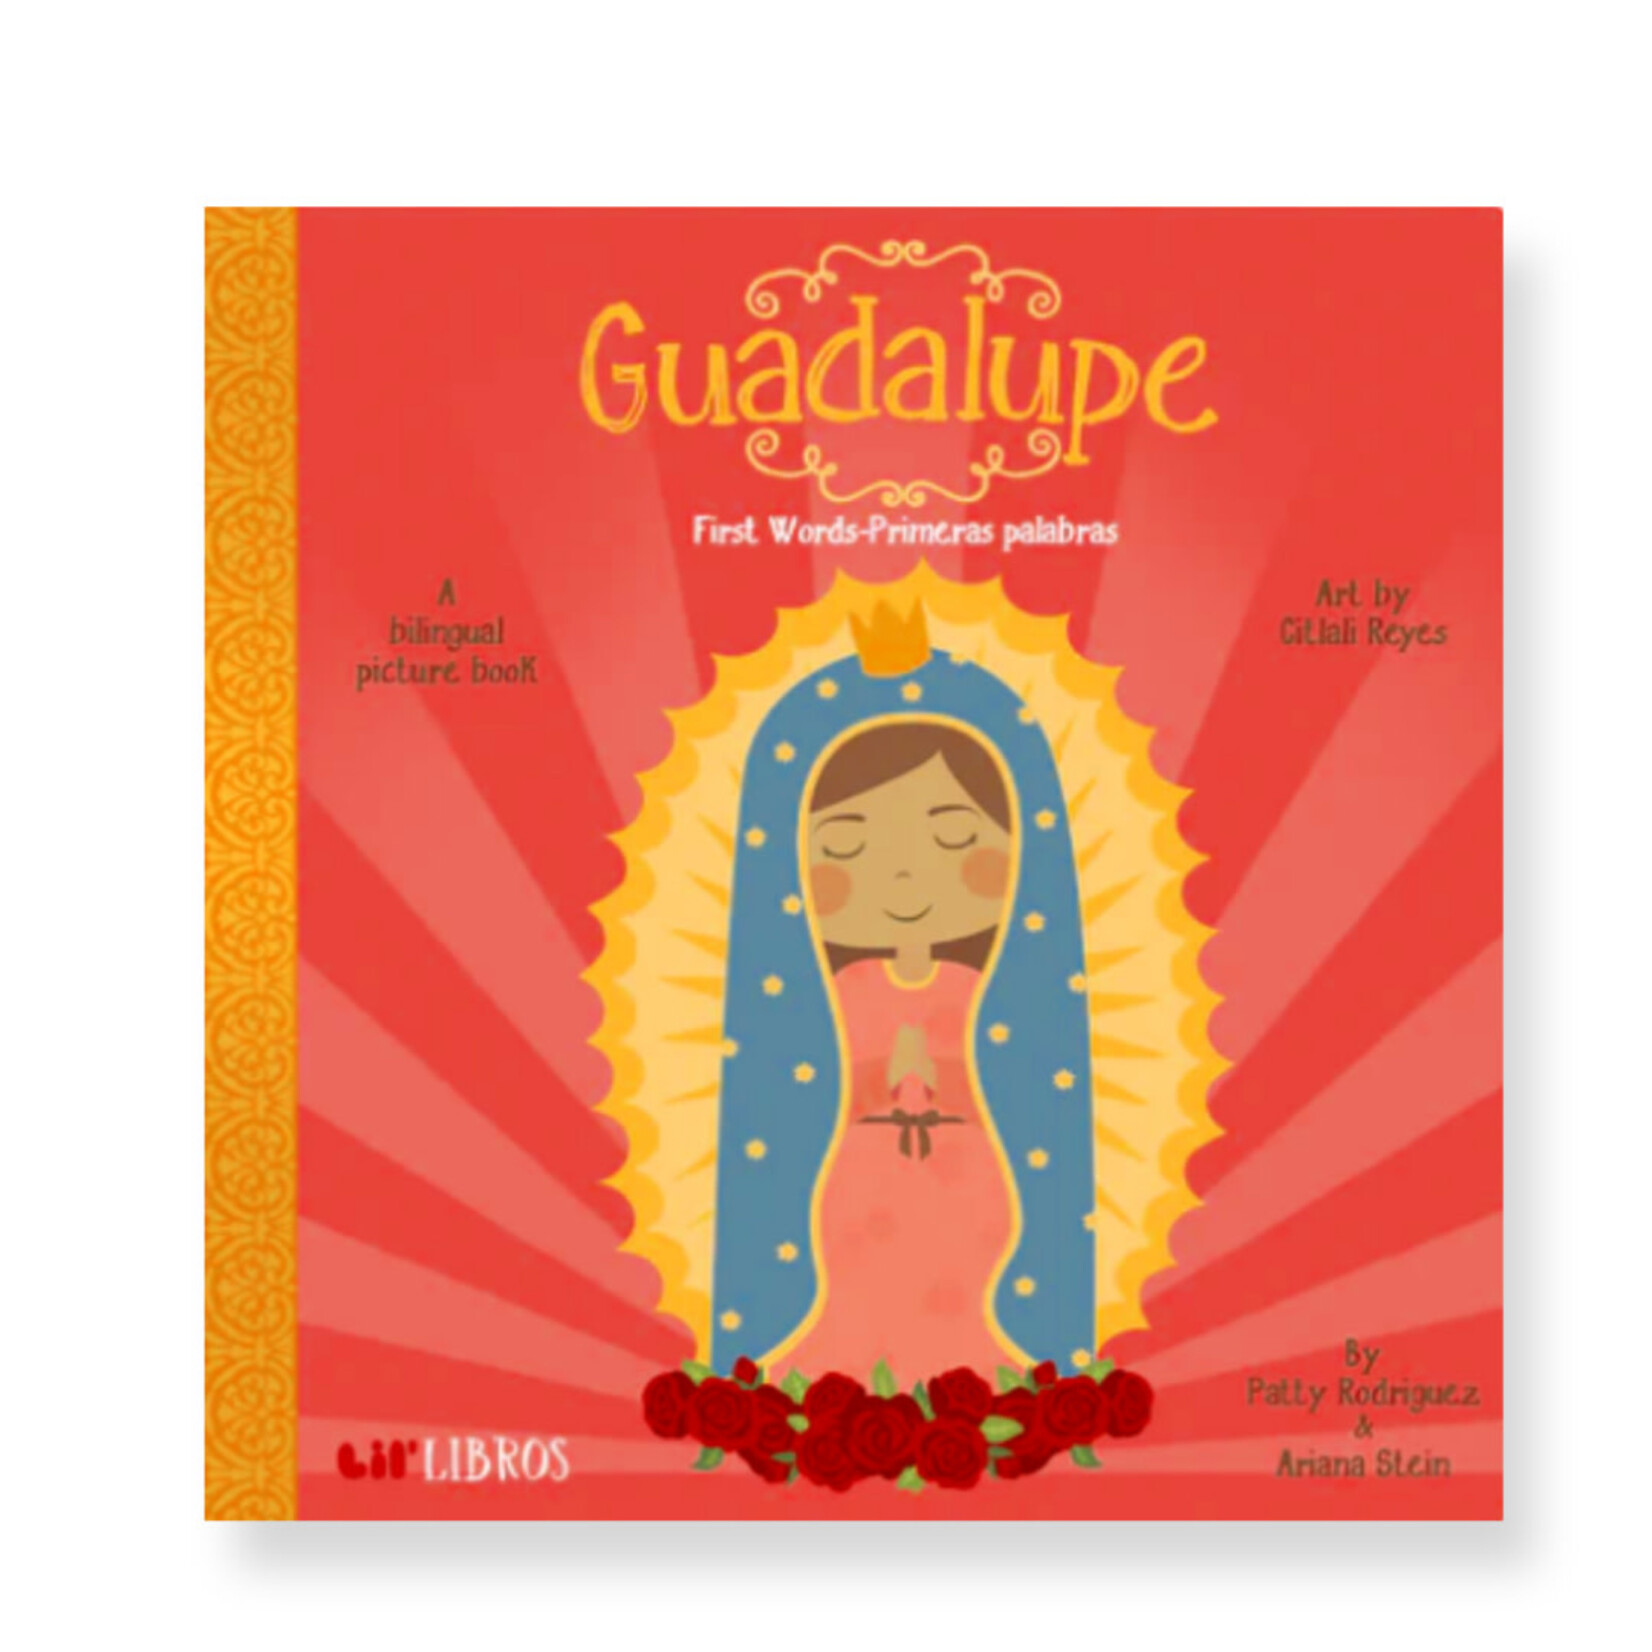 LIL' LIBROS GUADALUPE: FIRST WORDS